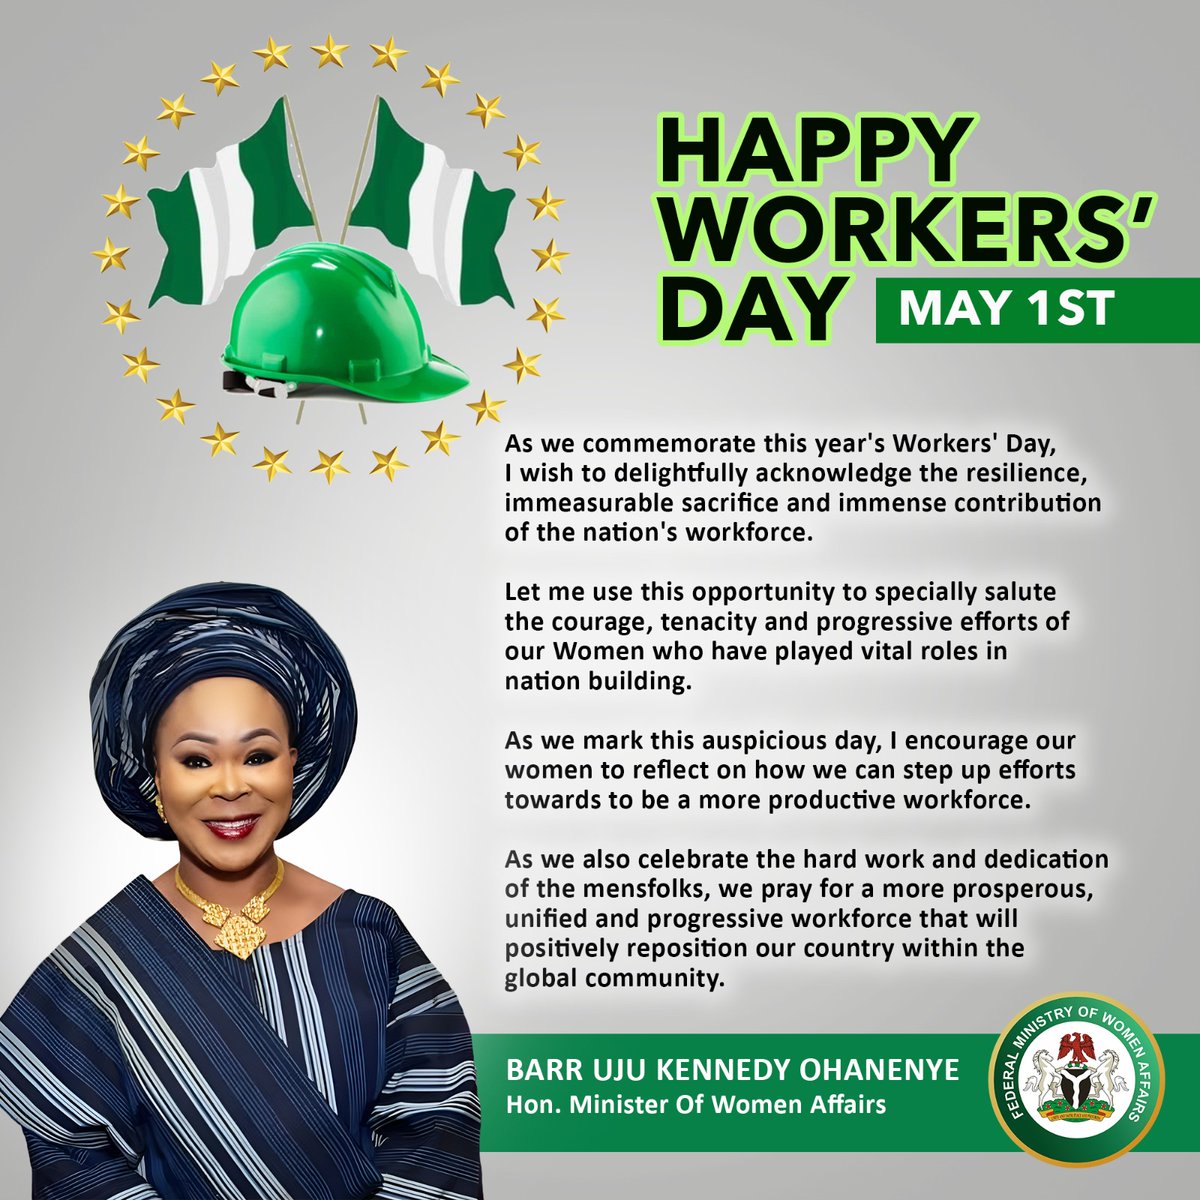 The Federal Ministry of Women Affairs is Wishing you all a blissful Happy Workers' Day